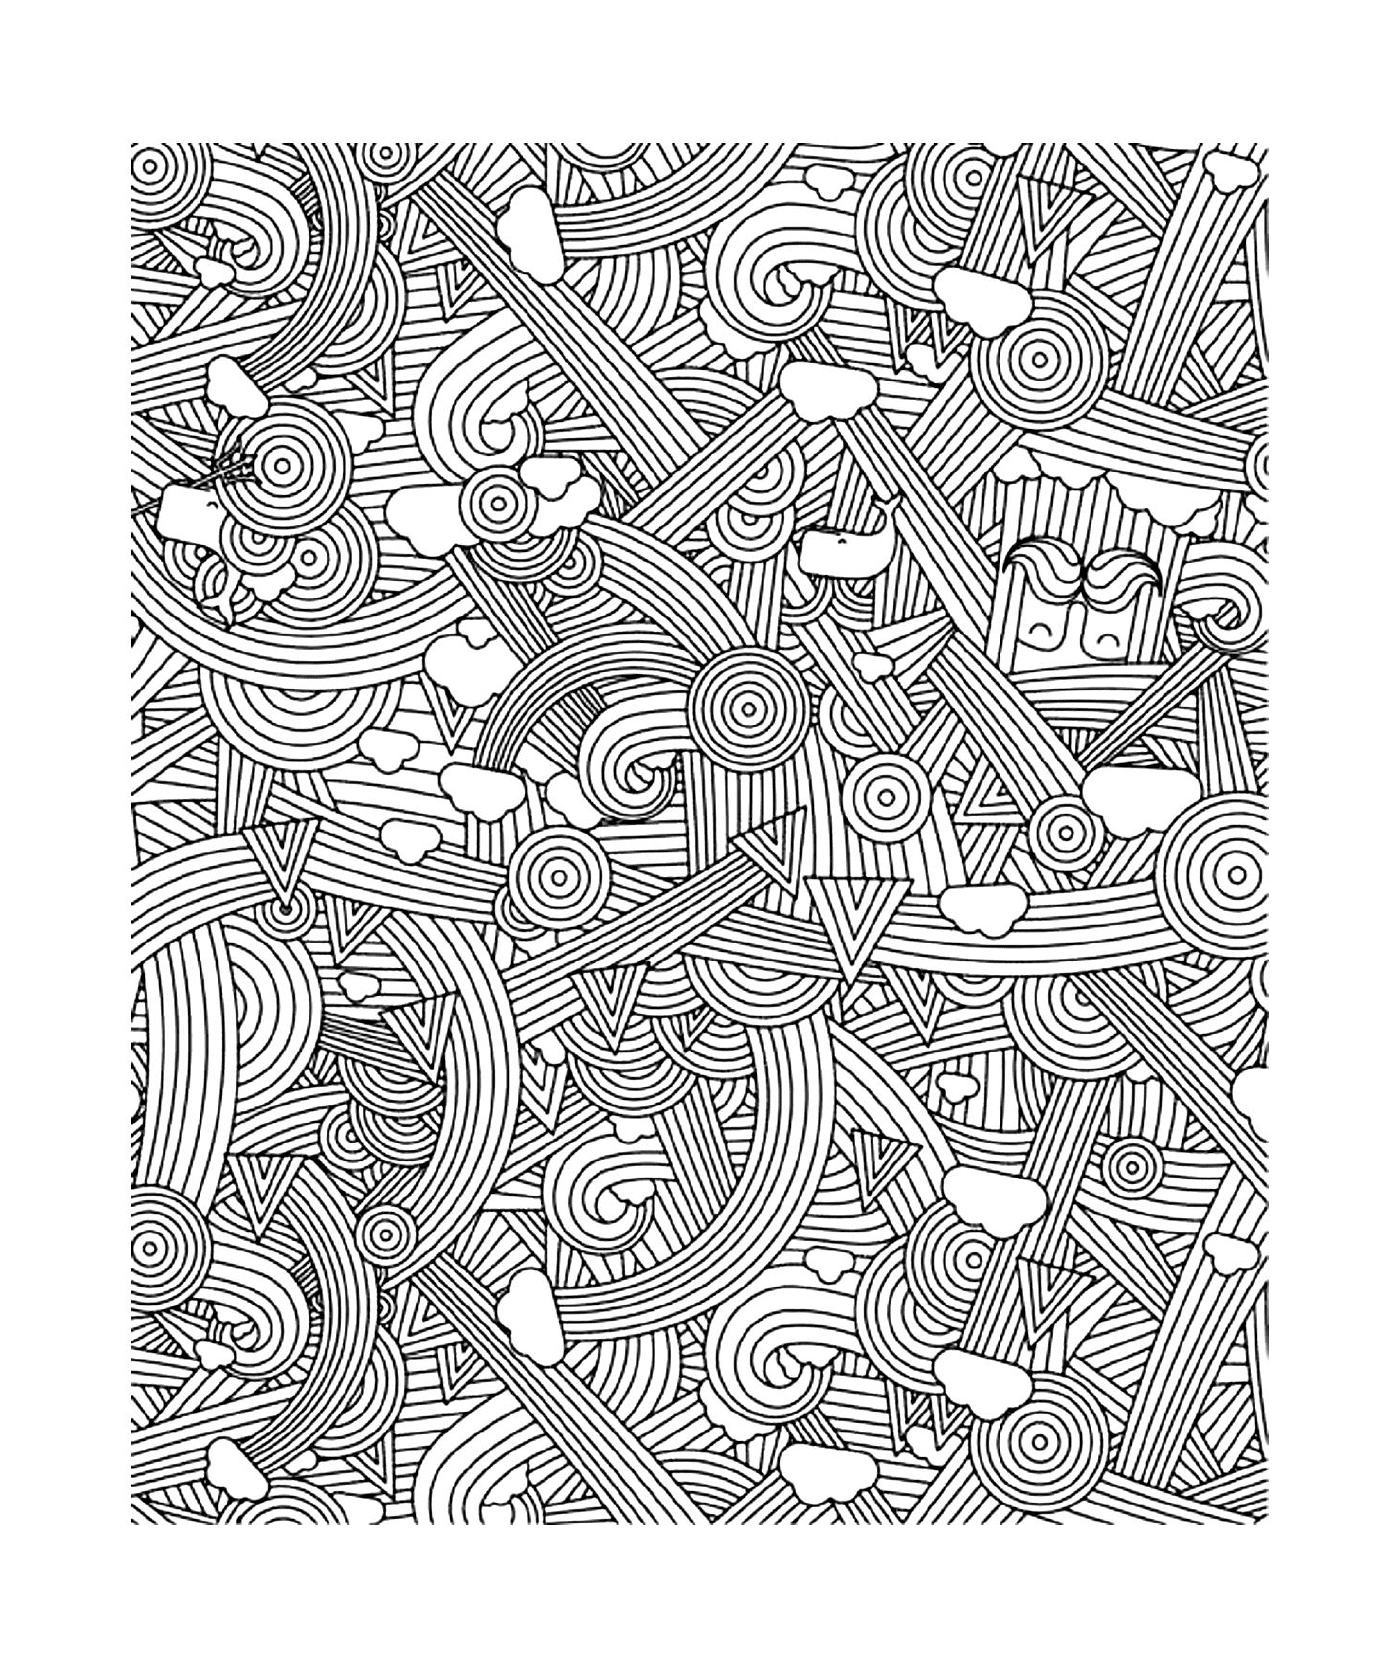  Image of a pattern with many lines 